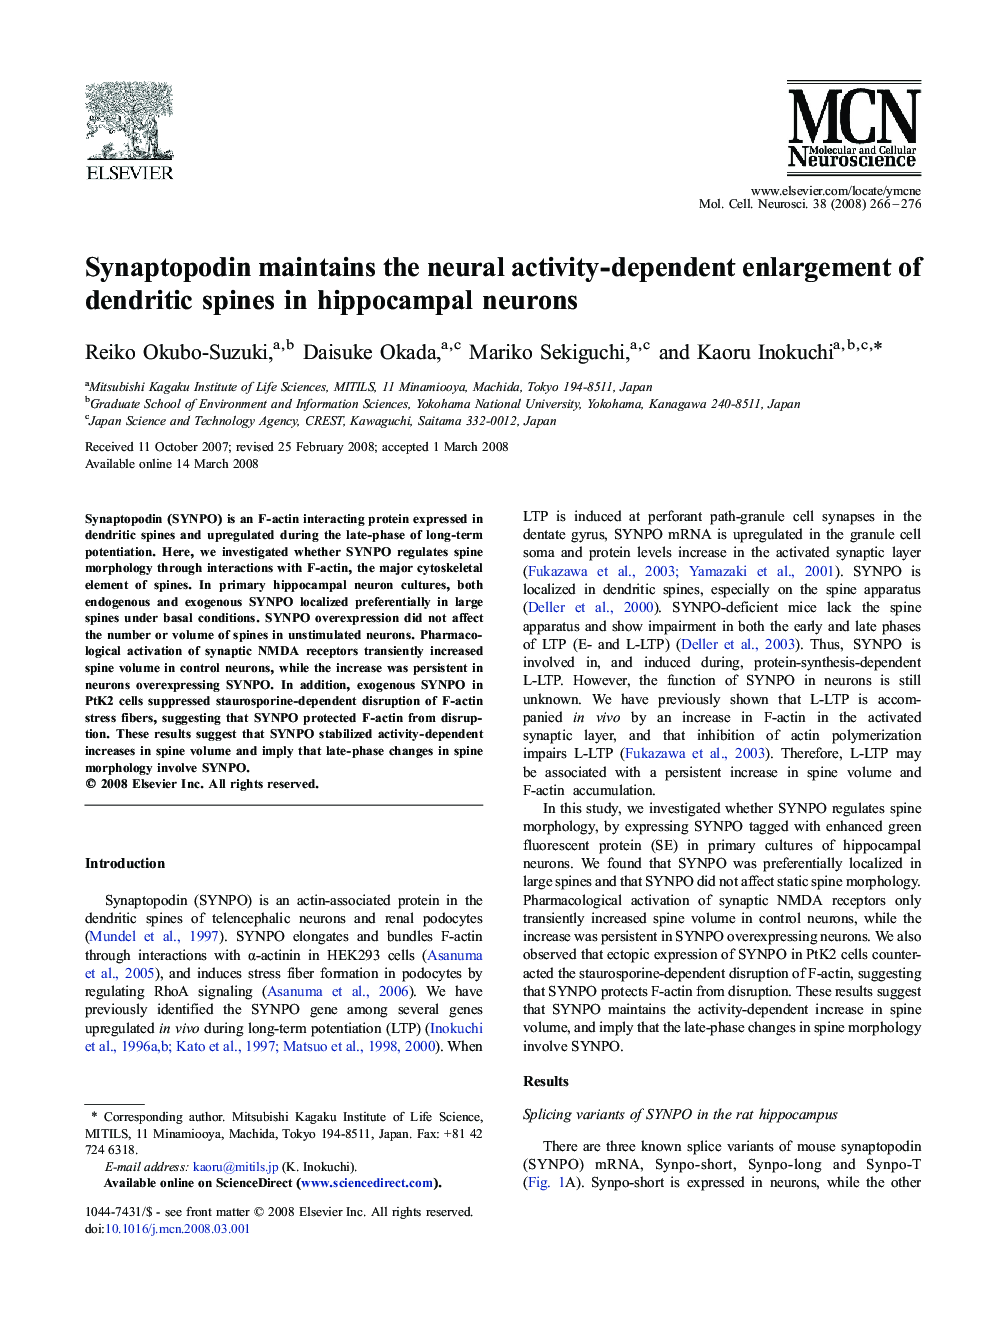 Synaptopodin maintains the neural activity-dependent enlargement of dendritic spines in hippocampal neurons